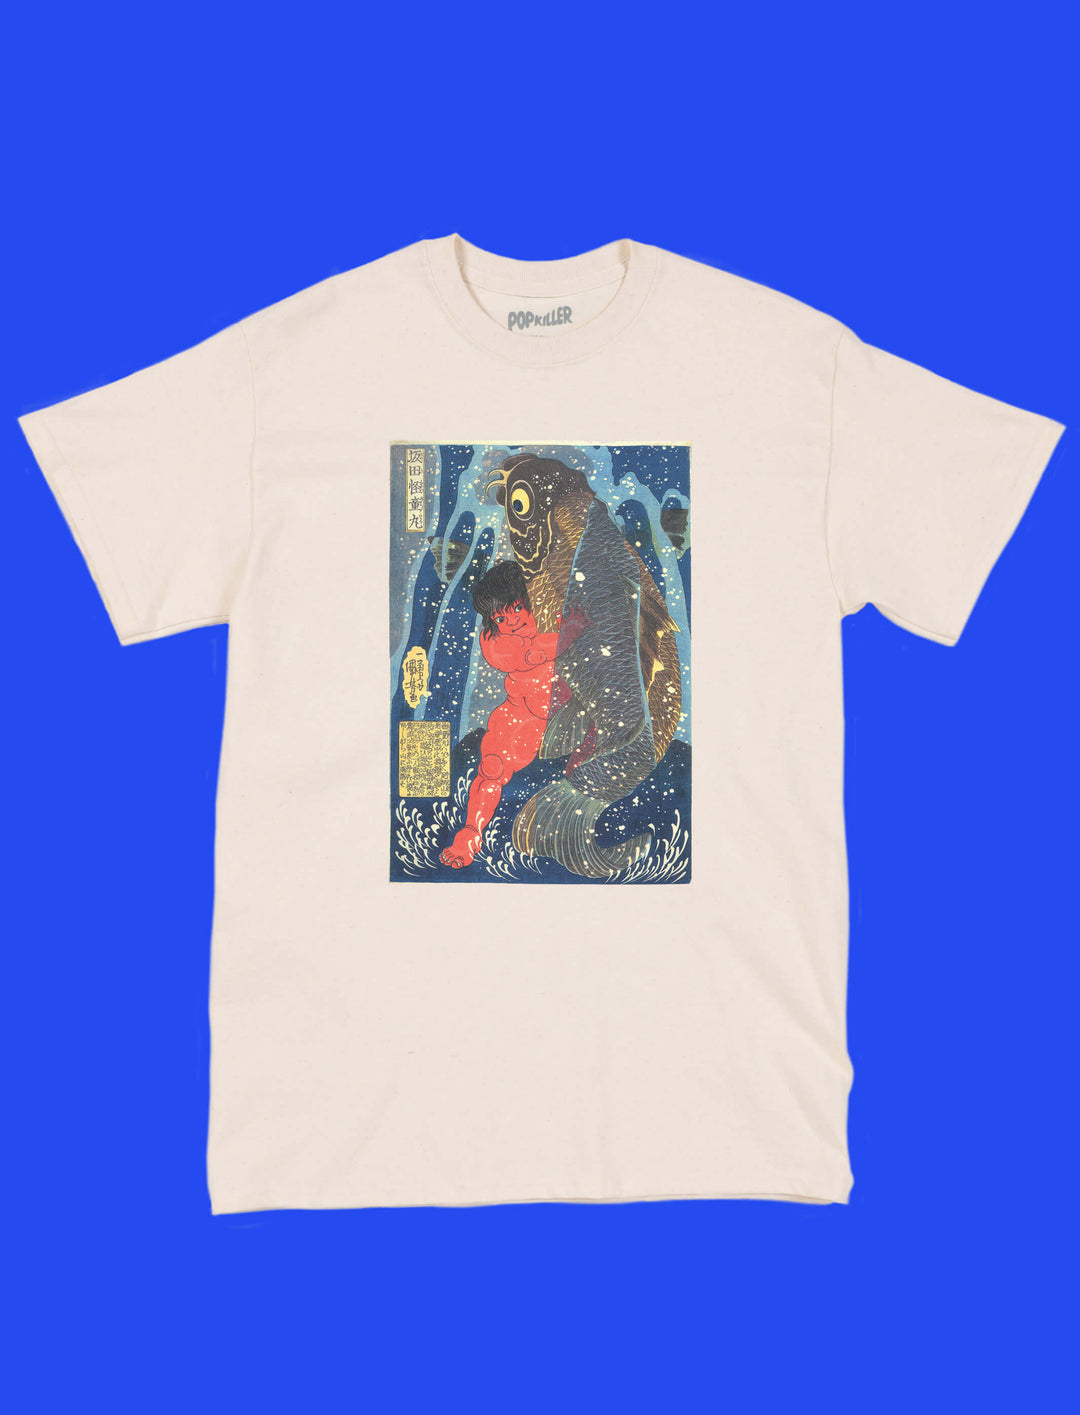 A beige t-shirt with traditional Japanese folklore depicted on it.